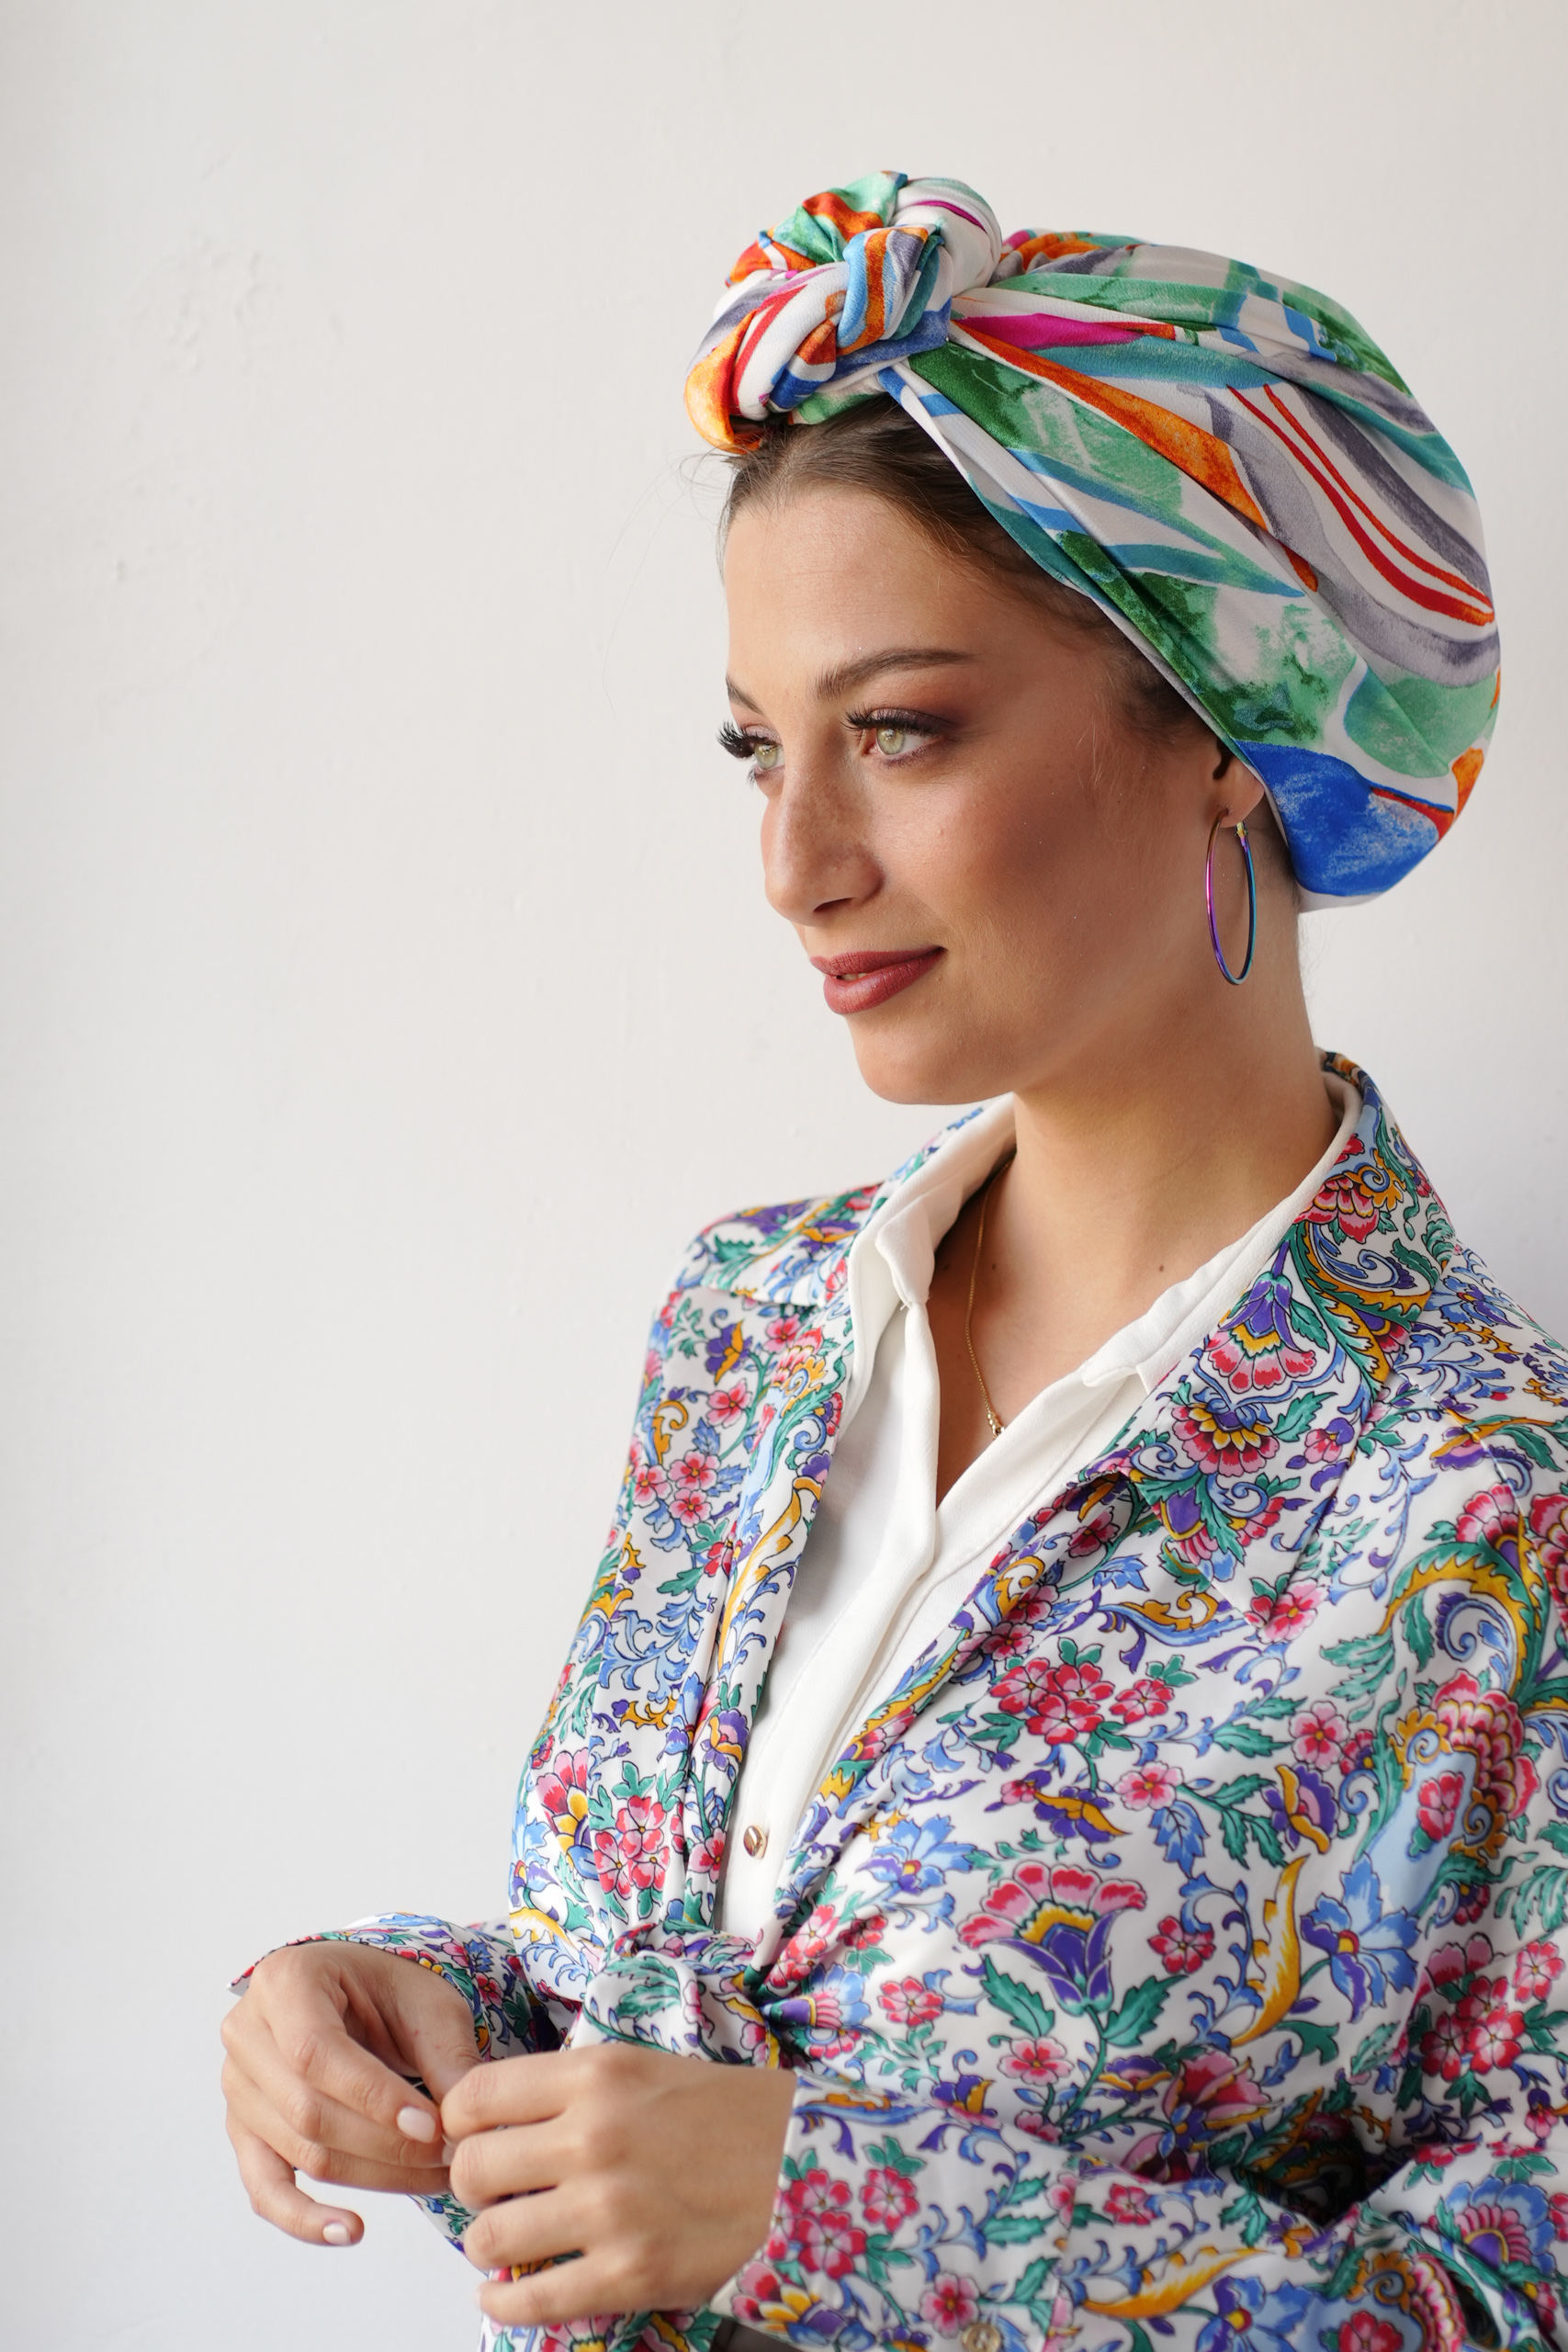 White and colorful Printed Headscarf